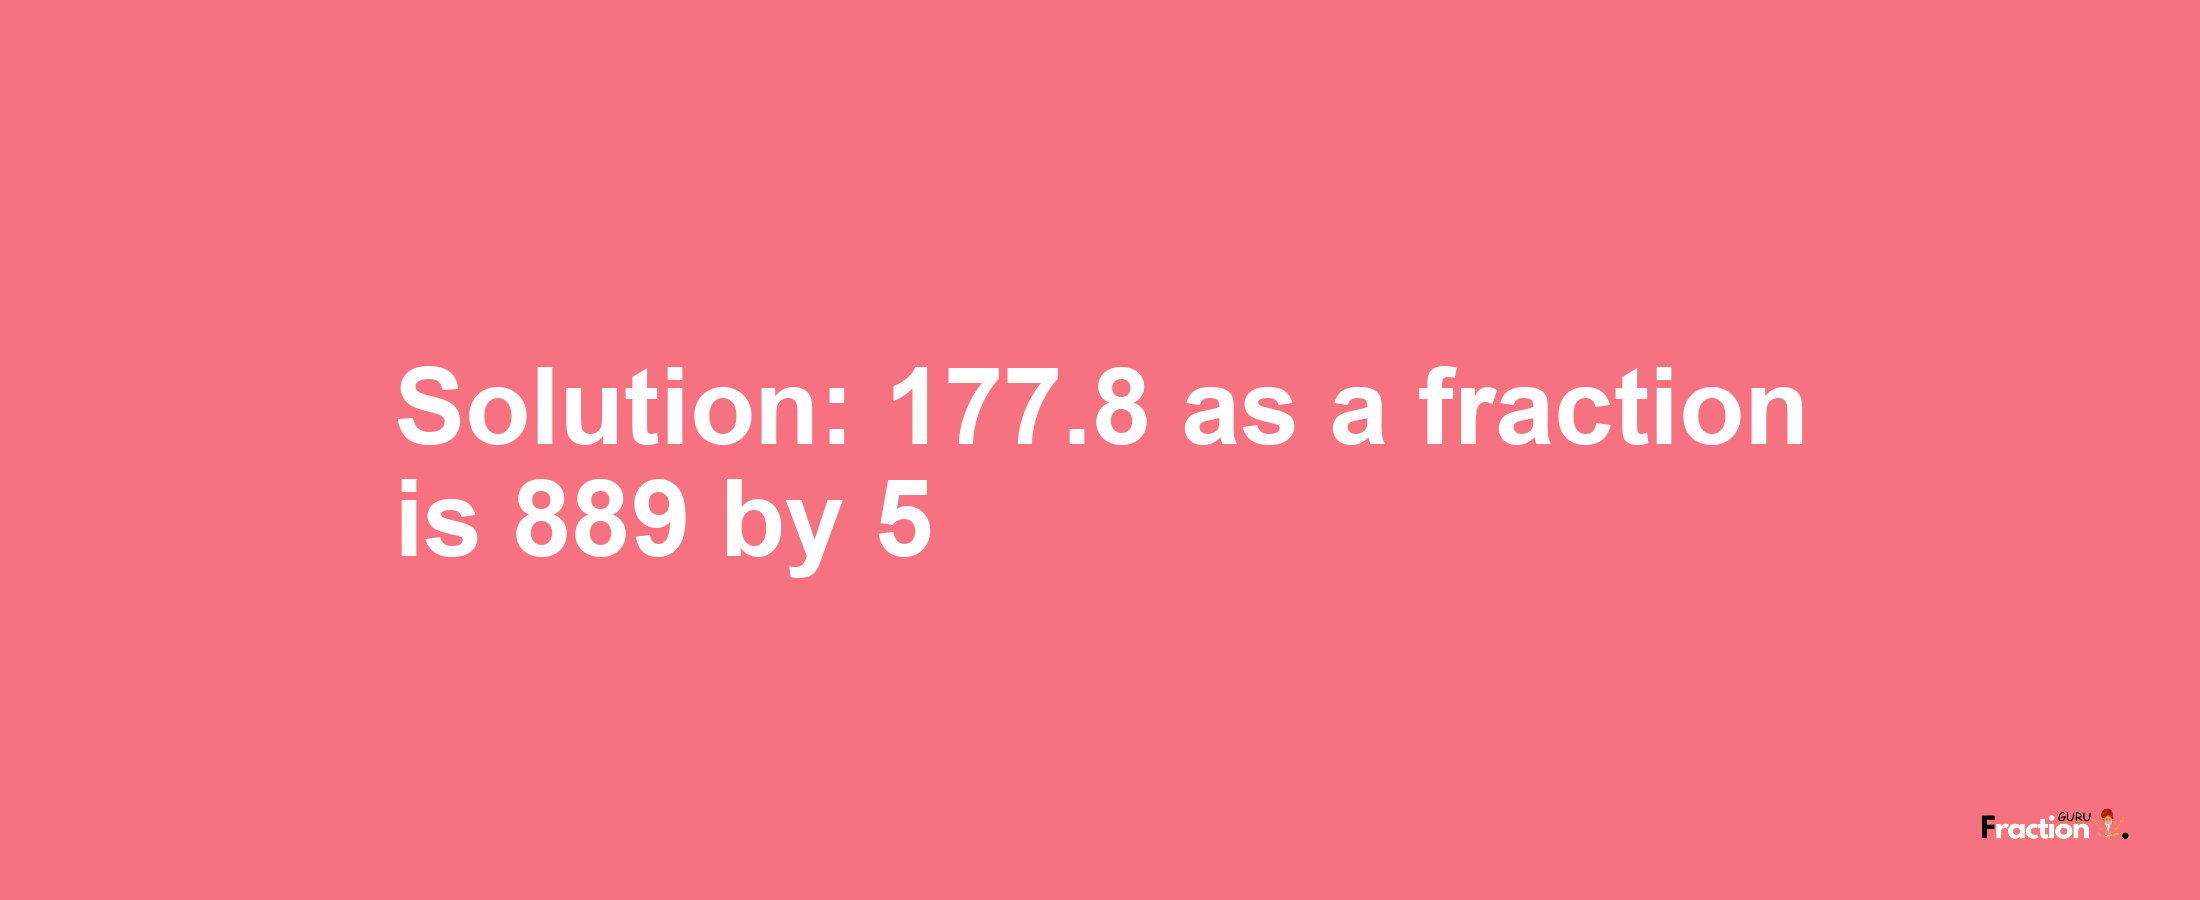 Solution:177.8 as a fraction is 889/5